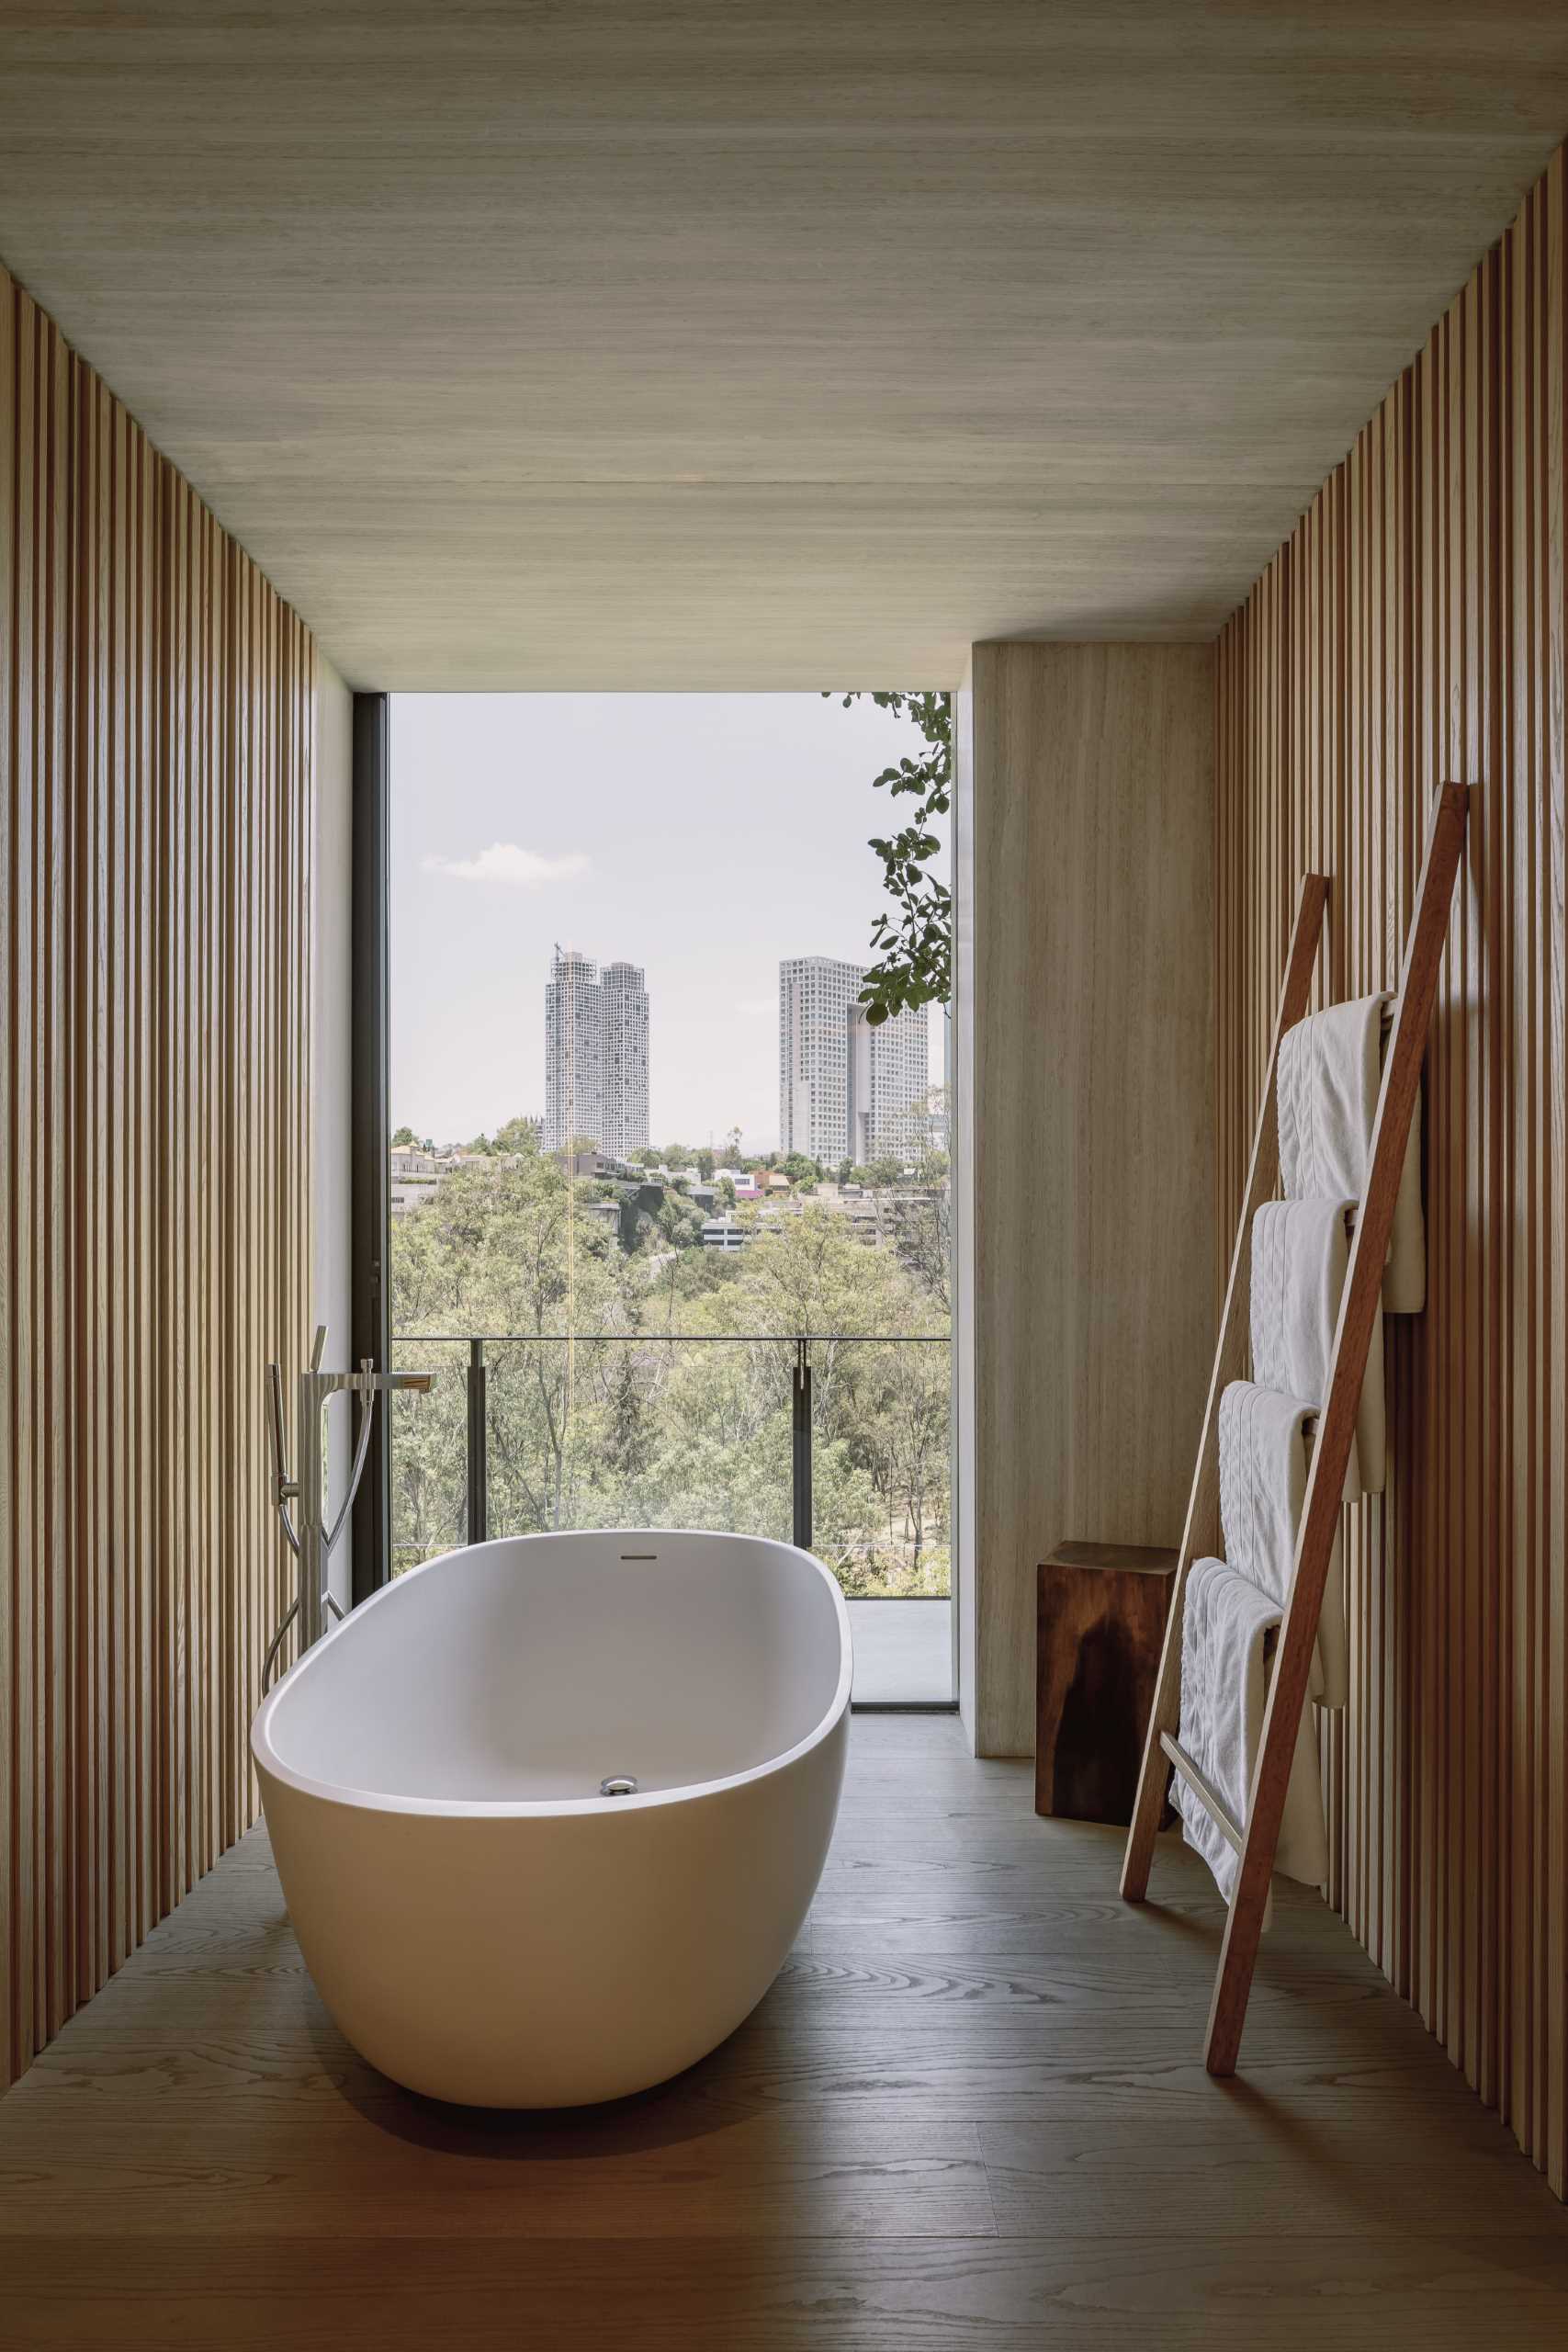 In this modern bathroom, a freestanding bathtub is positioned in front of the floor-to-ceiling window, providing relaxing views of the city.